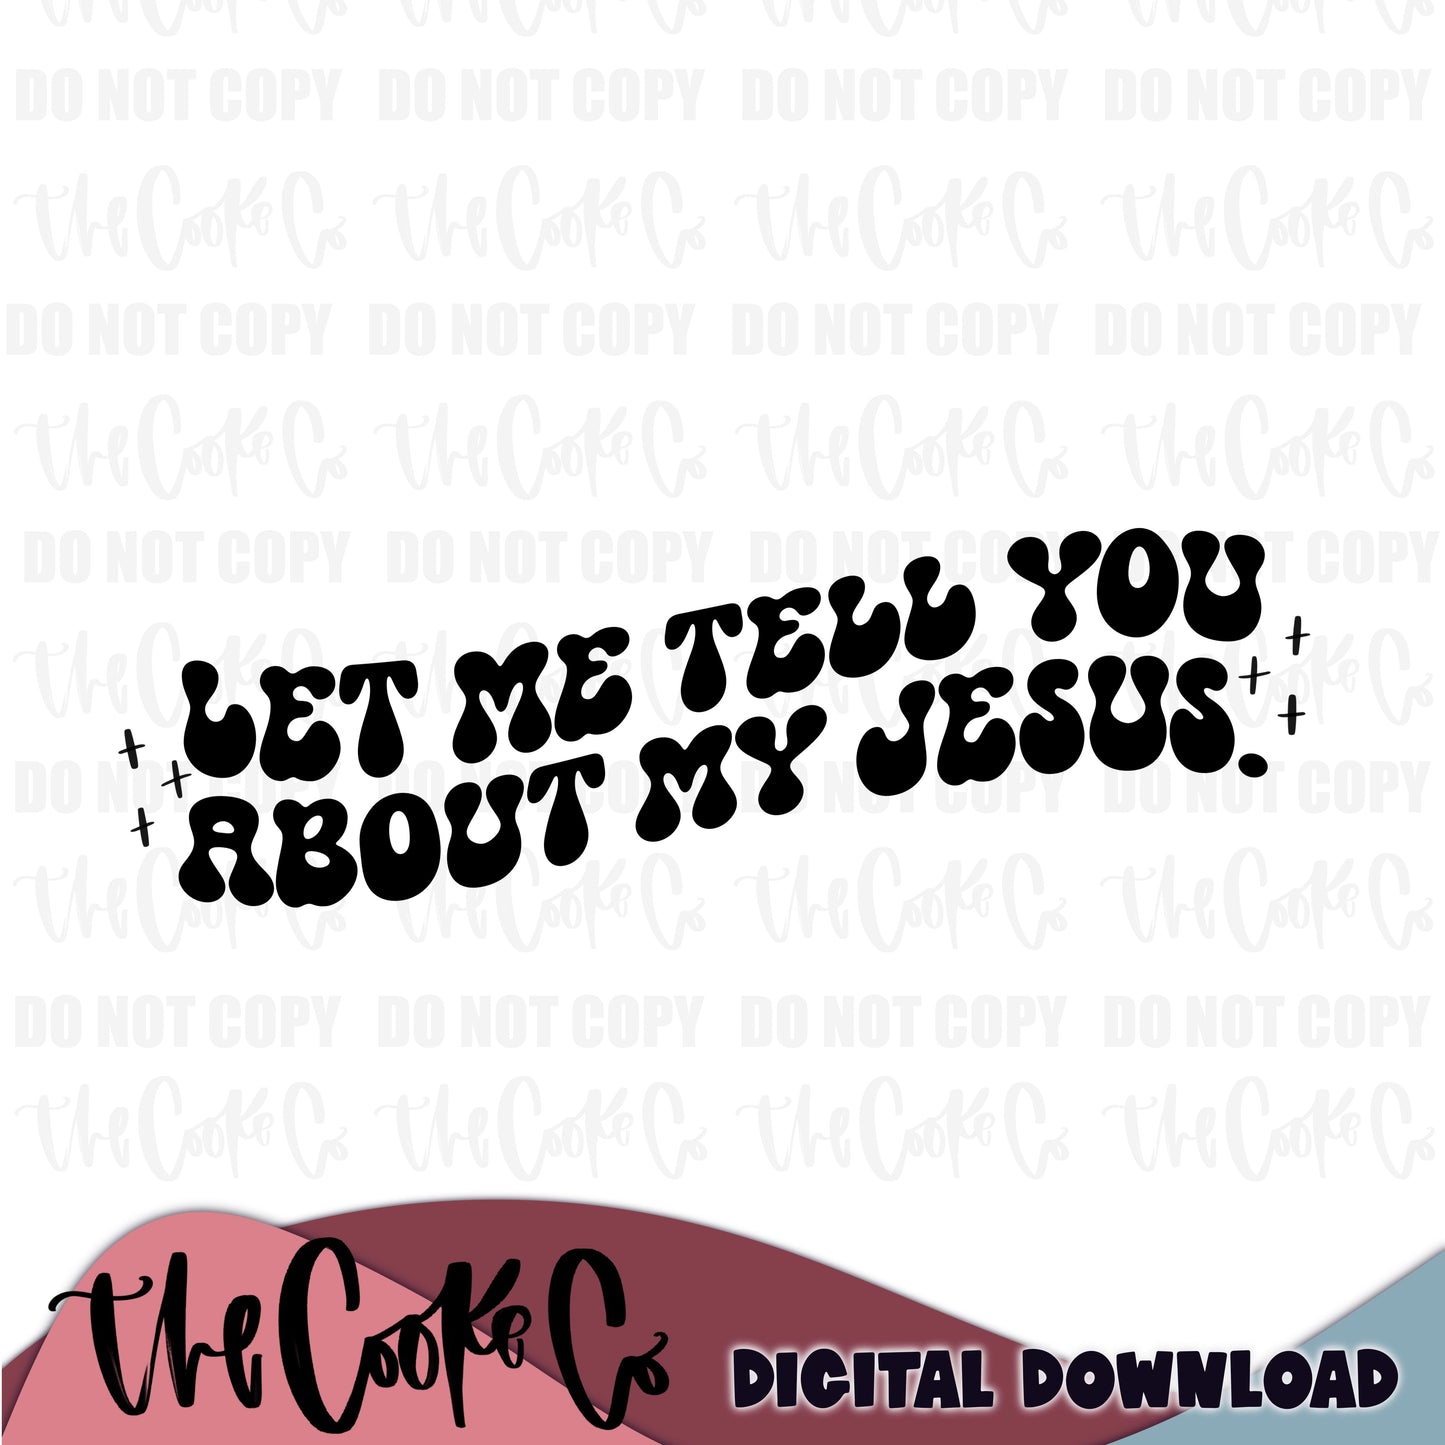 LET ME TELL YOU ABOUT MY JESUS | Digital Download | PNG